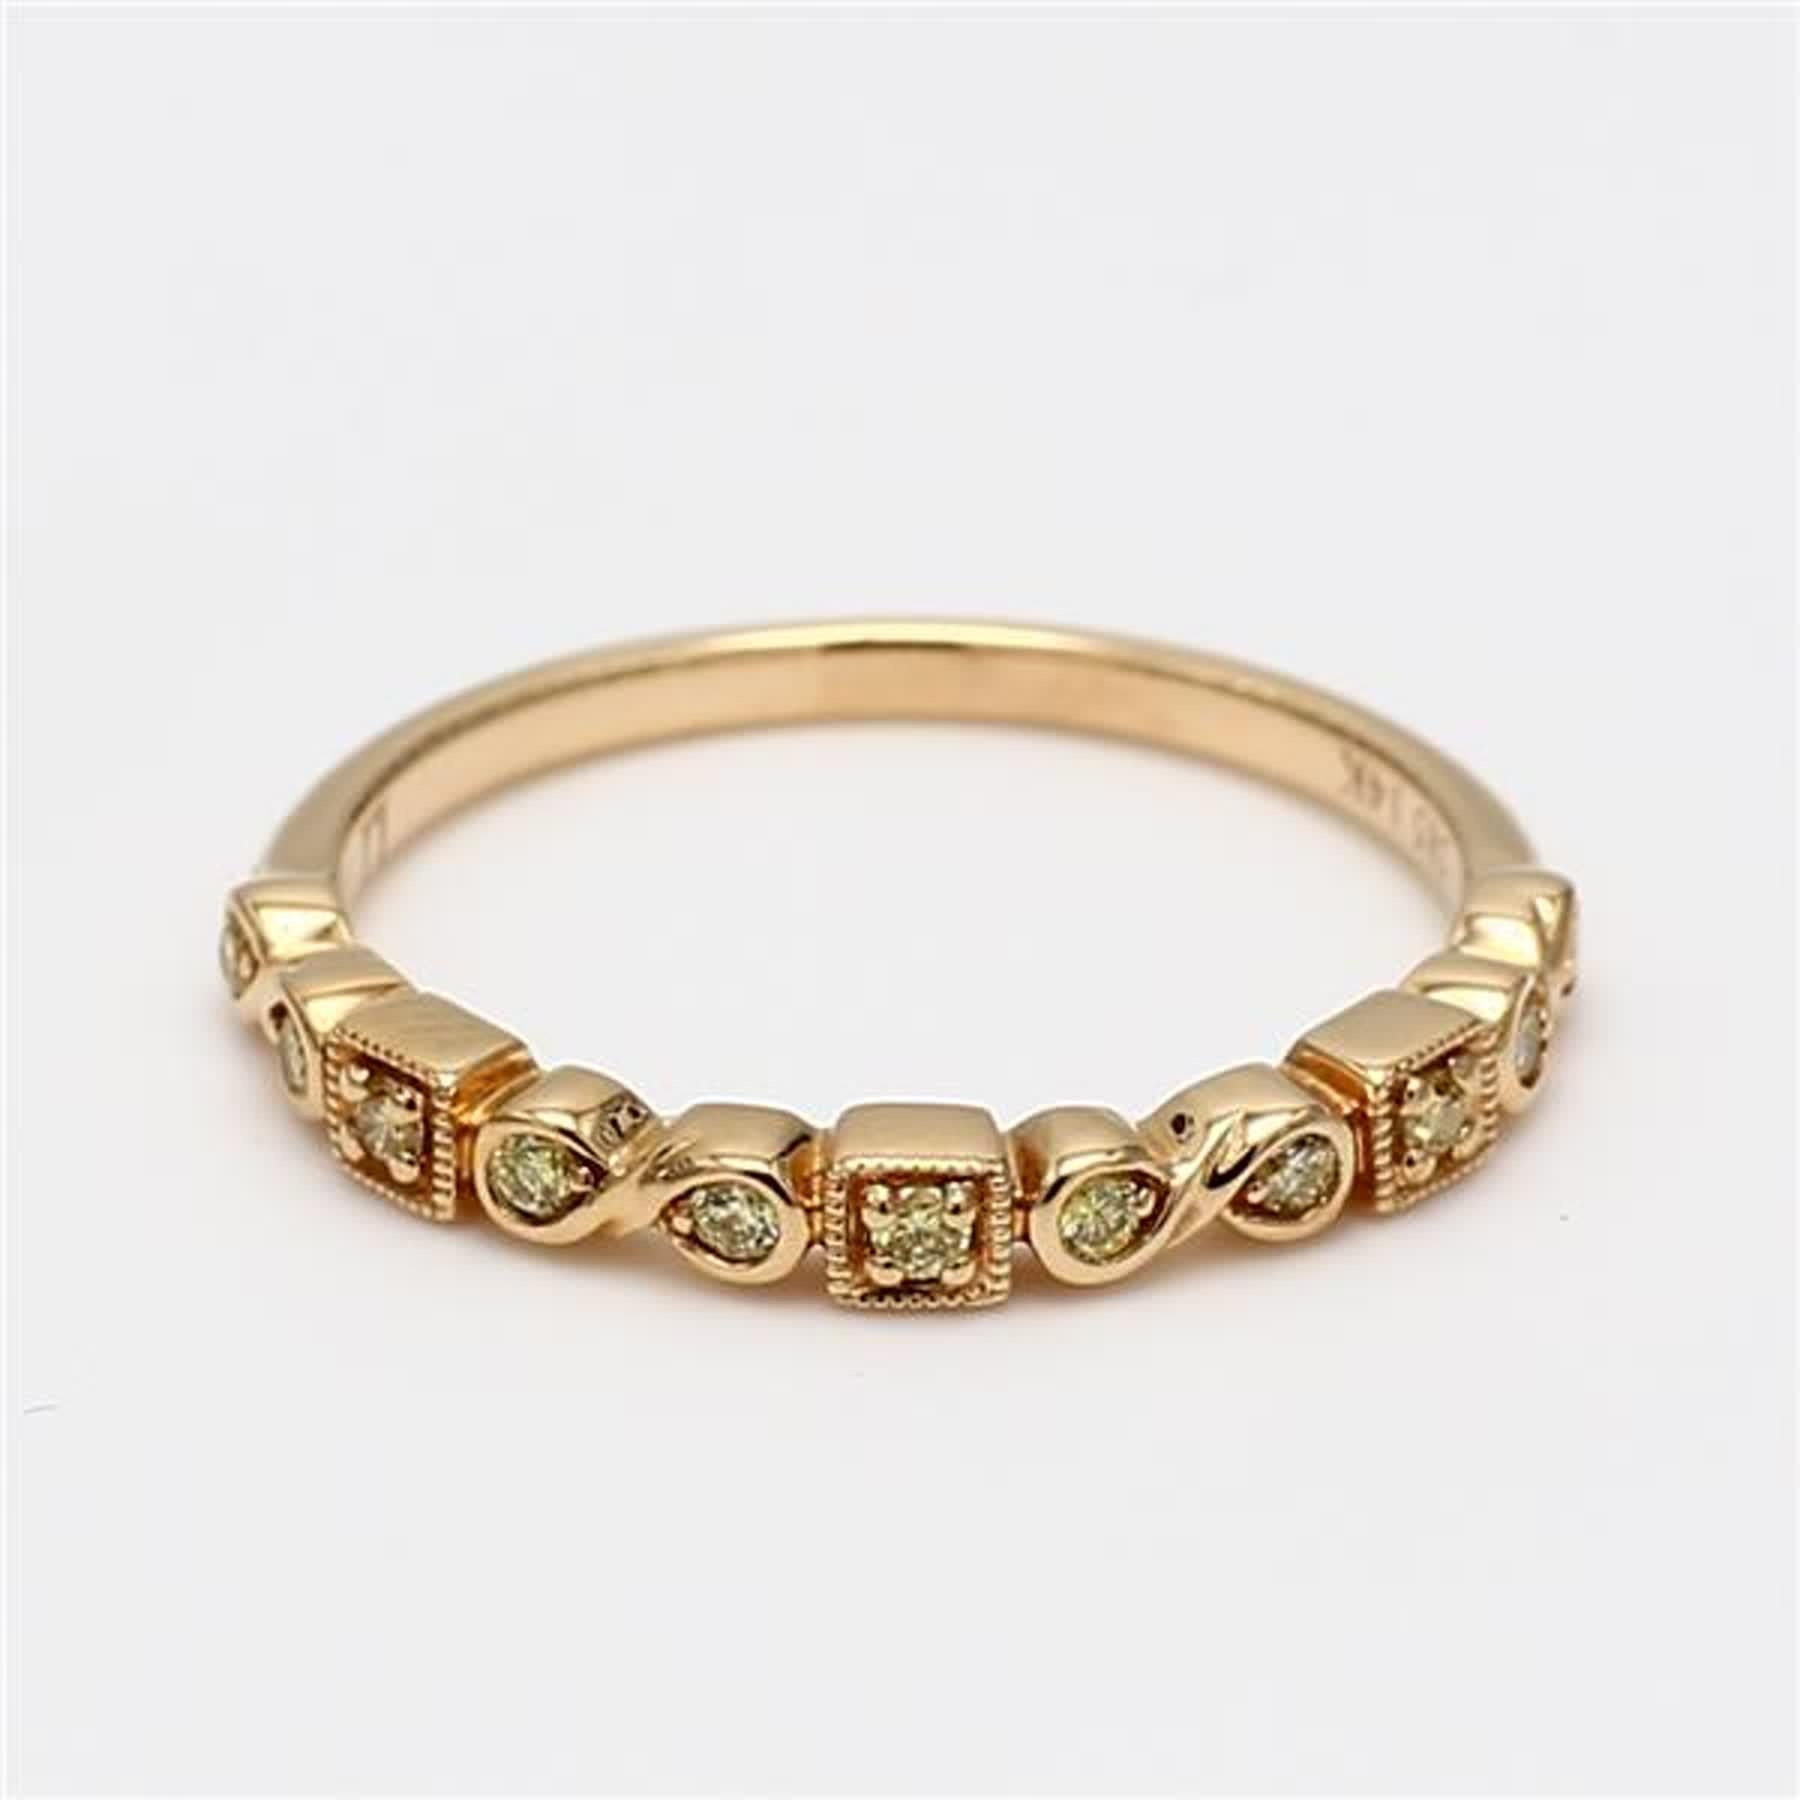 RareGemWorld's classic diamond band. Mounted in a beautiful 18K Yellow Gold setting with natural round yellow diamond melee. This band is guaranteed to impress and enhance your personal collection!

Total Weight: .10cts

Diamond Measurements: